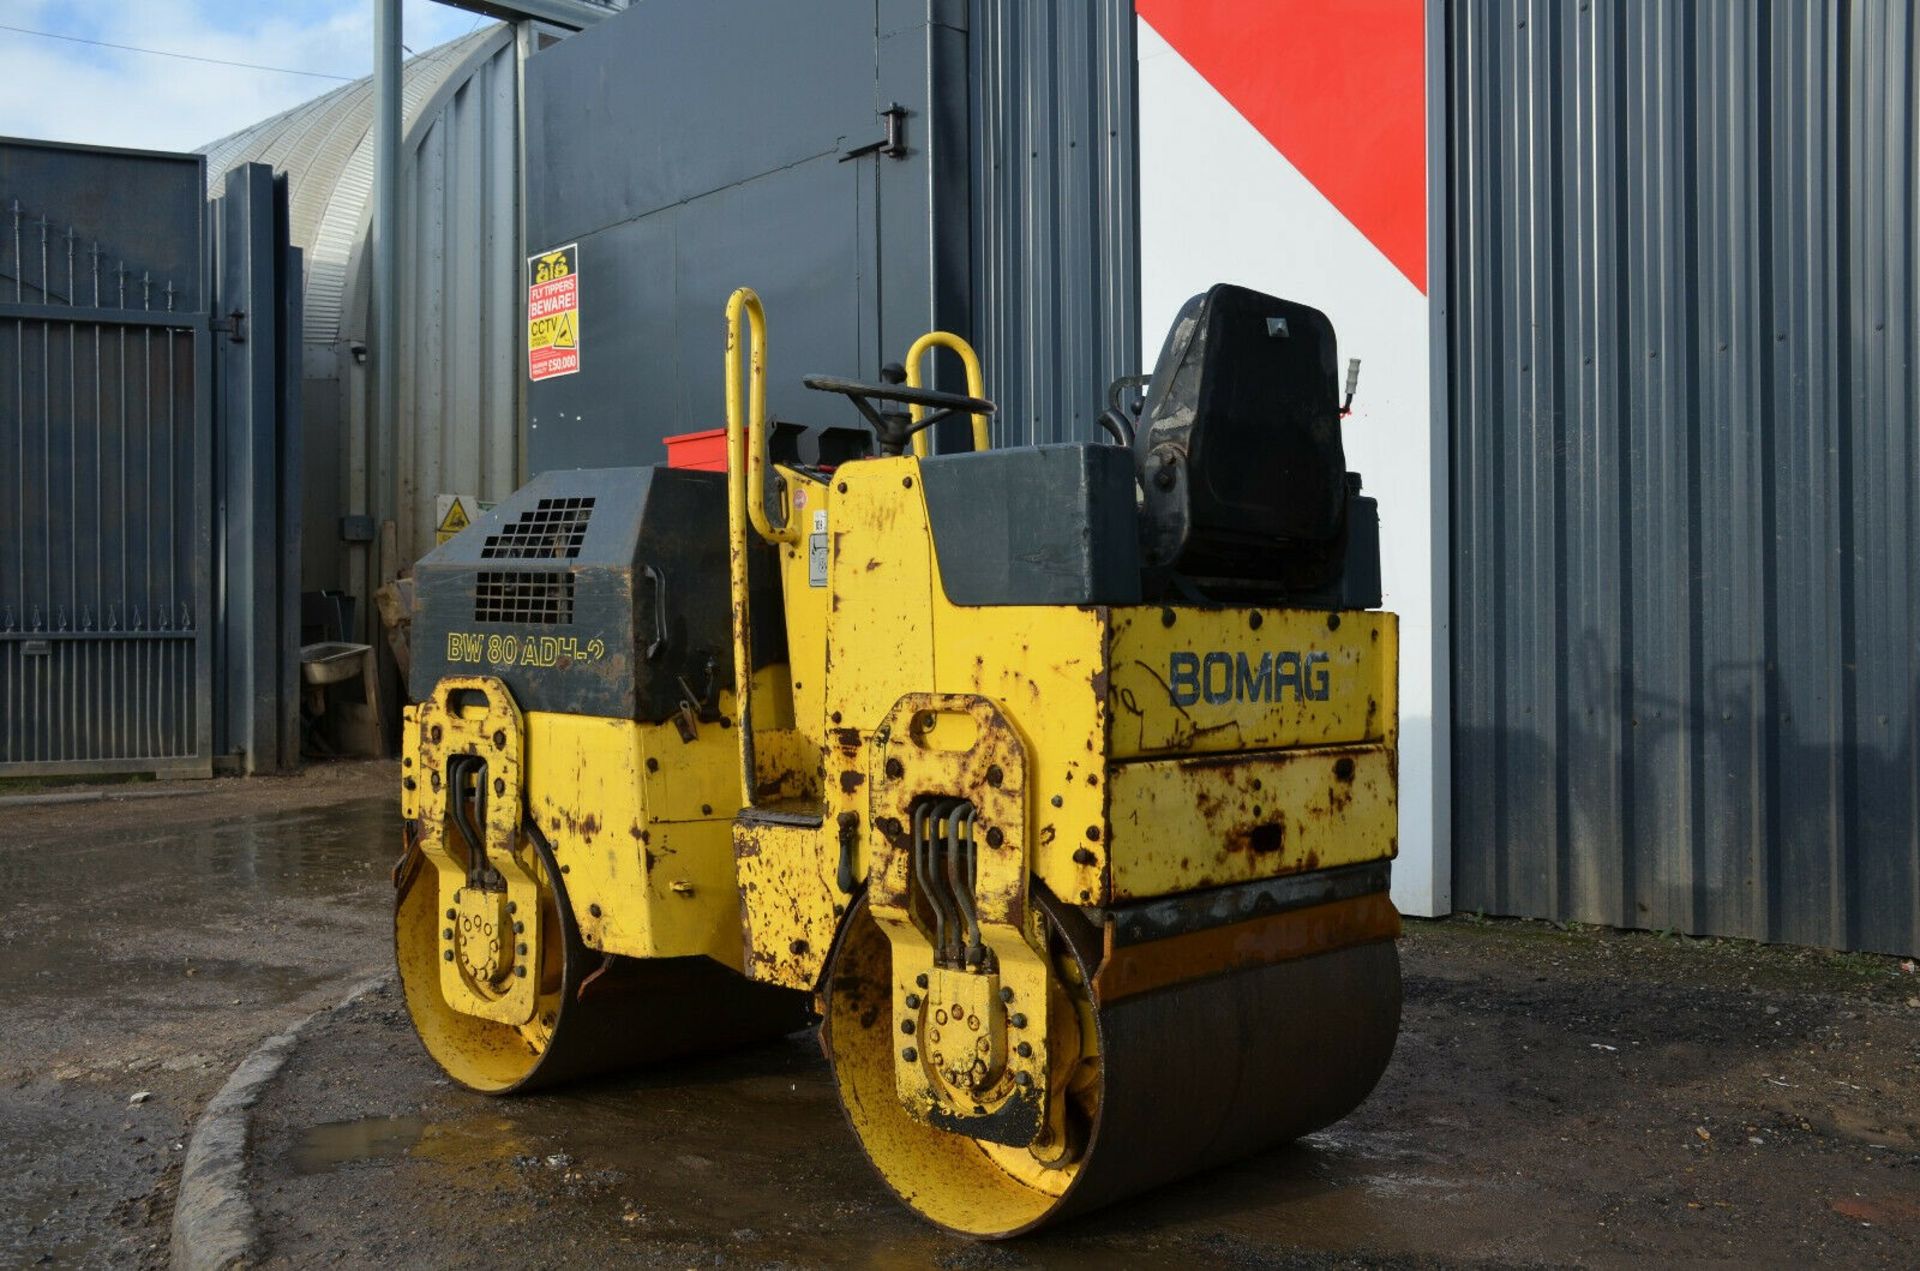 Bomag BW 80 AD-2 Roller - Image 11 of 12